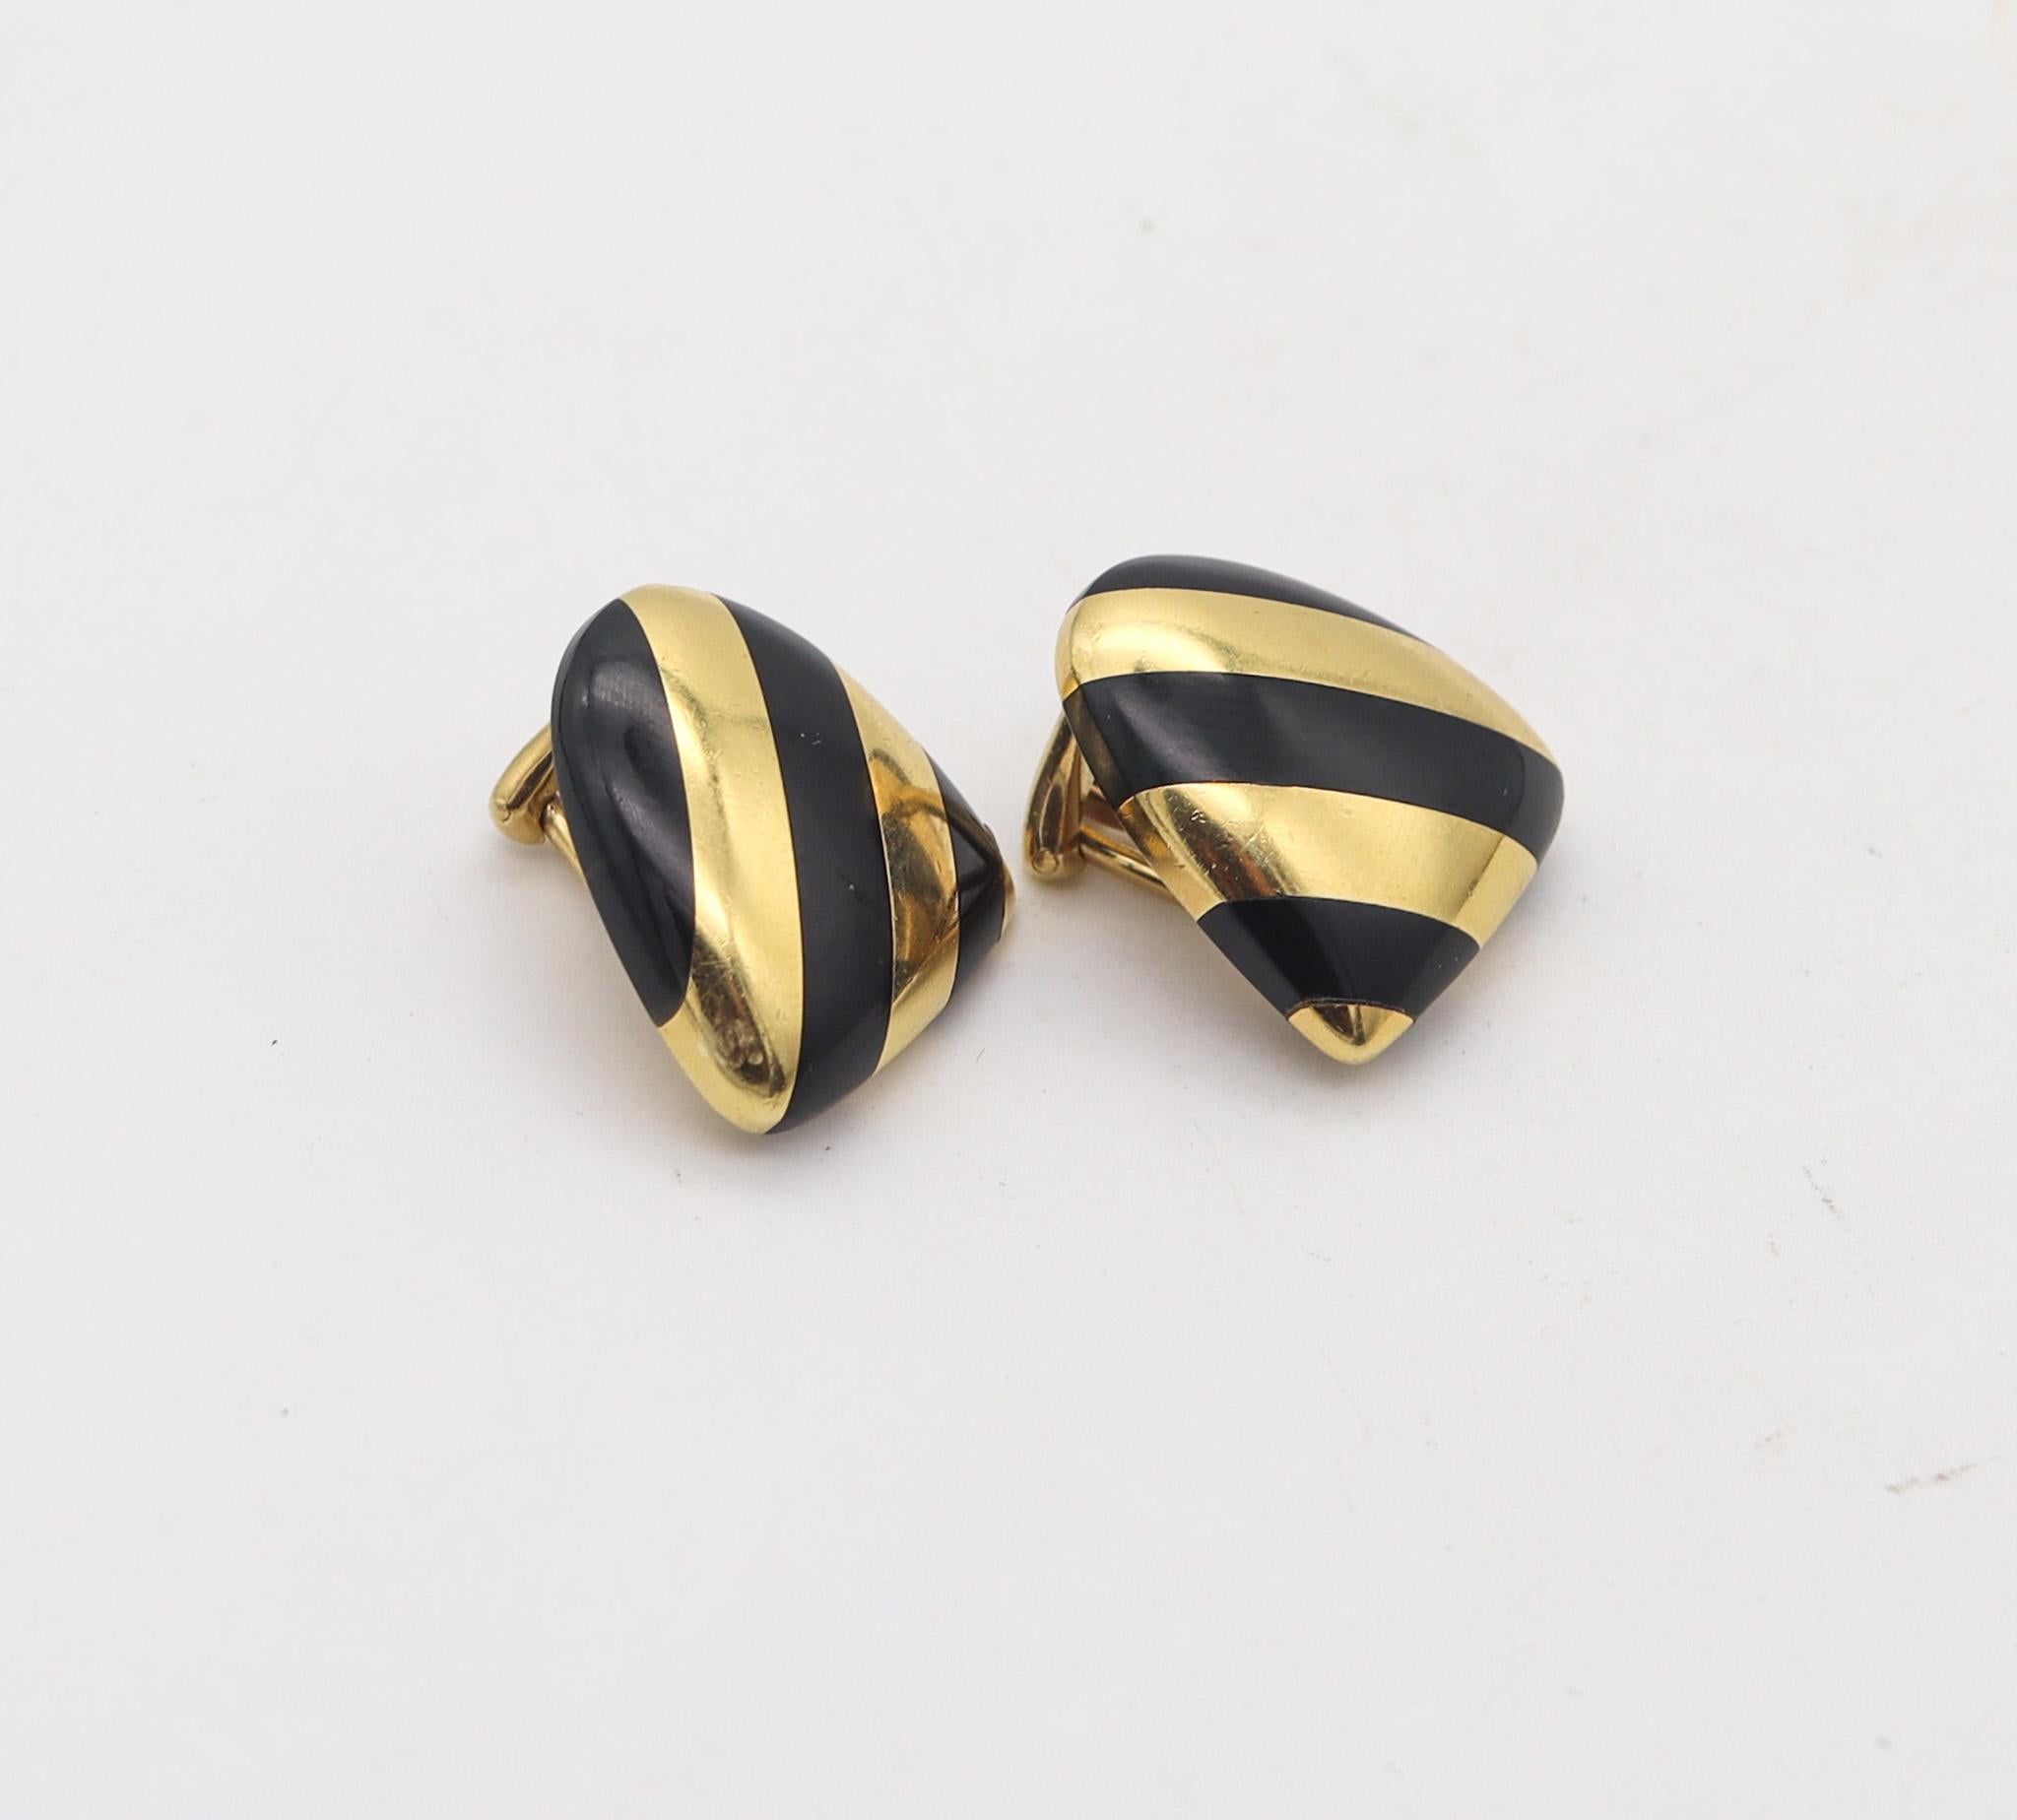 Modernist Tiffany & Co 1977 Angela Cummings Clips Earrings In 18Kt Gold With Black Jade For Sale